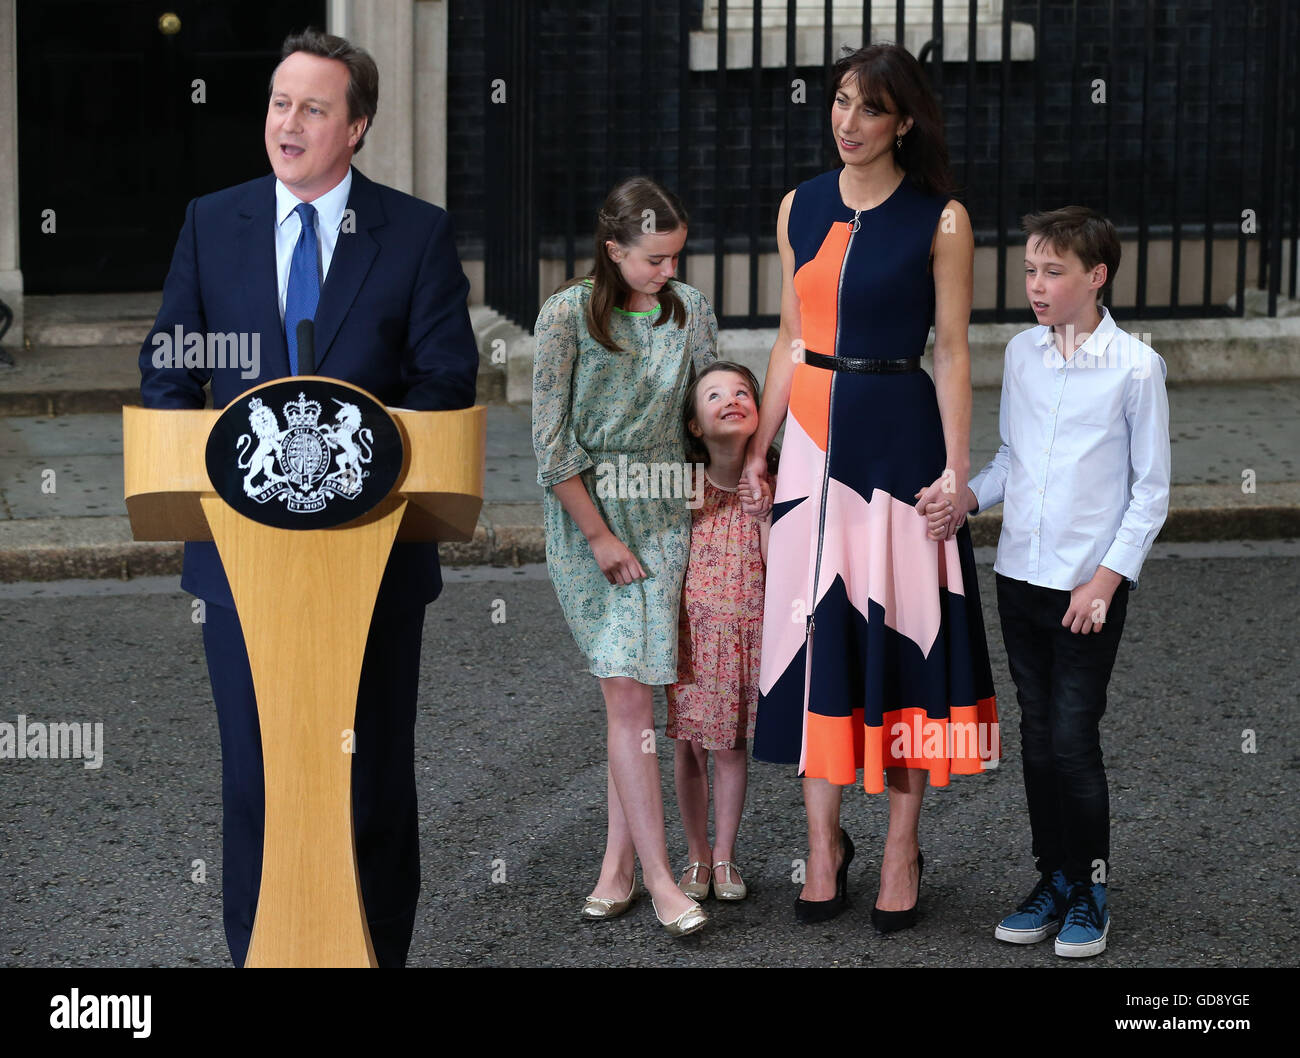 London, L) gives a speech before leaving 10 Downing Street in London. 13th July, 2016. British outgoing Prime Minister David Cameron(1st, L) gives a speech before leaving 10 Downing Street in London, Britain on July 13, 2016. Cameron bid farewell to 10 Downing Street and headed to Buckingham Palace to offer his resignation to Queen Elizabeth II on Wednesday afternoon. © Han Yan/Xinhua/Alamy Live News Stock Photo